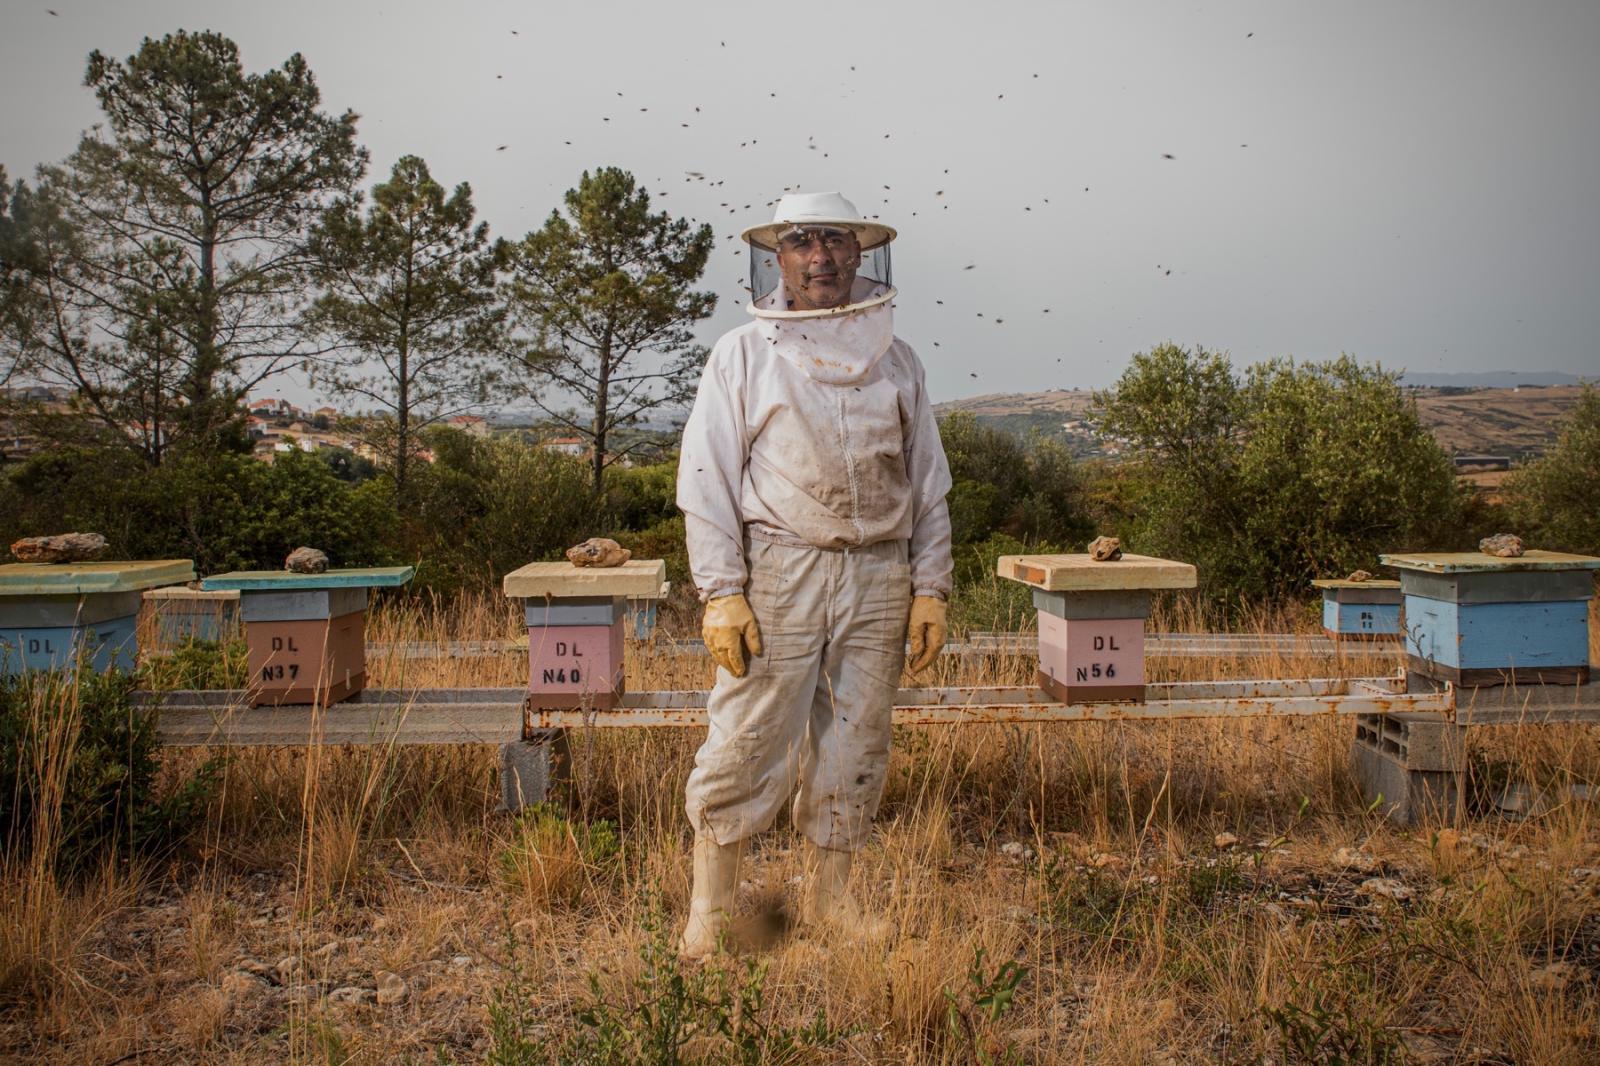 Leonardo, beekeeper from the west zone of Portugal.